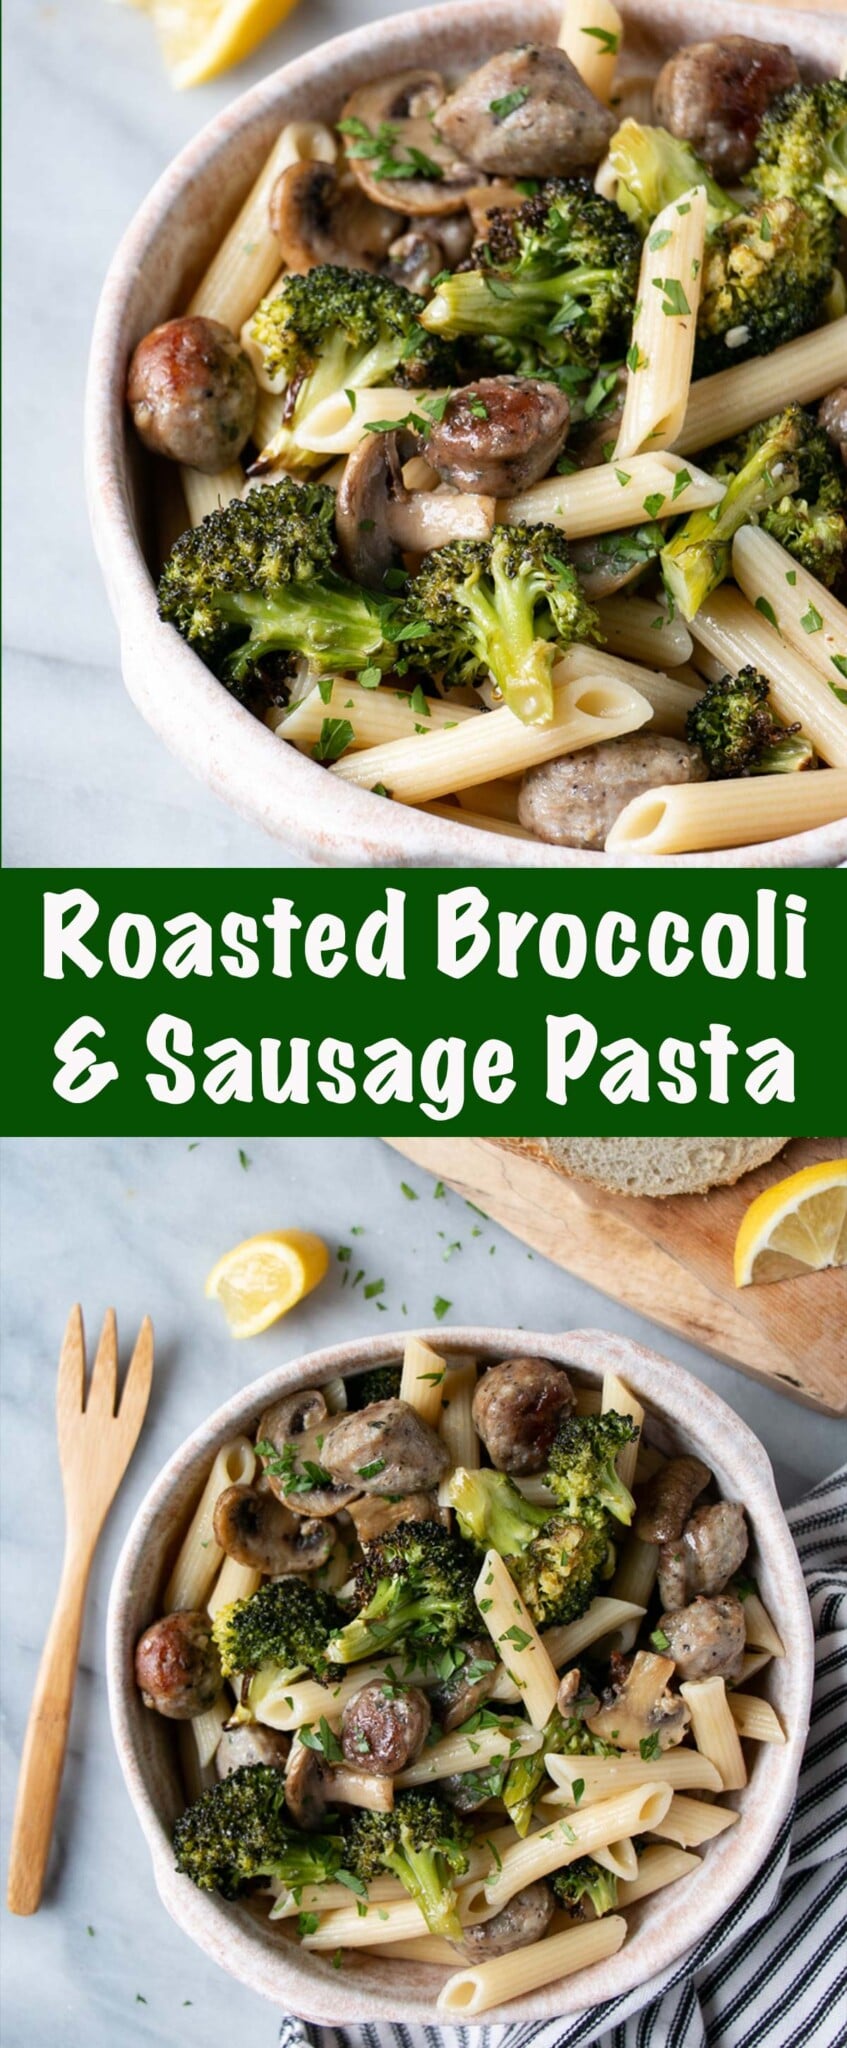 An almost completely hands-off meal with roasted sausage and broccoli pasta. Add some roasted mushrooms and a squeeze of lemon for a bright and complete dinner! via @mykitchenlove